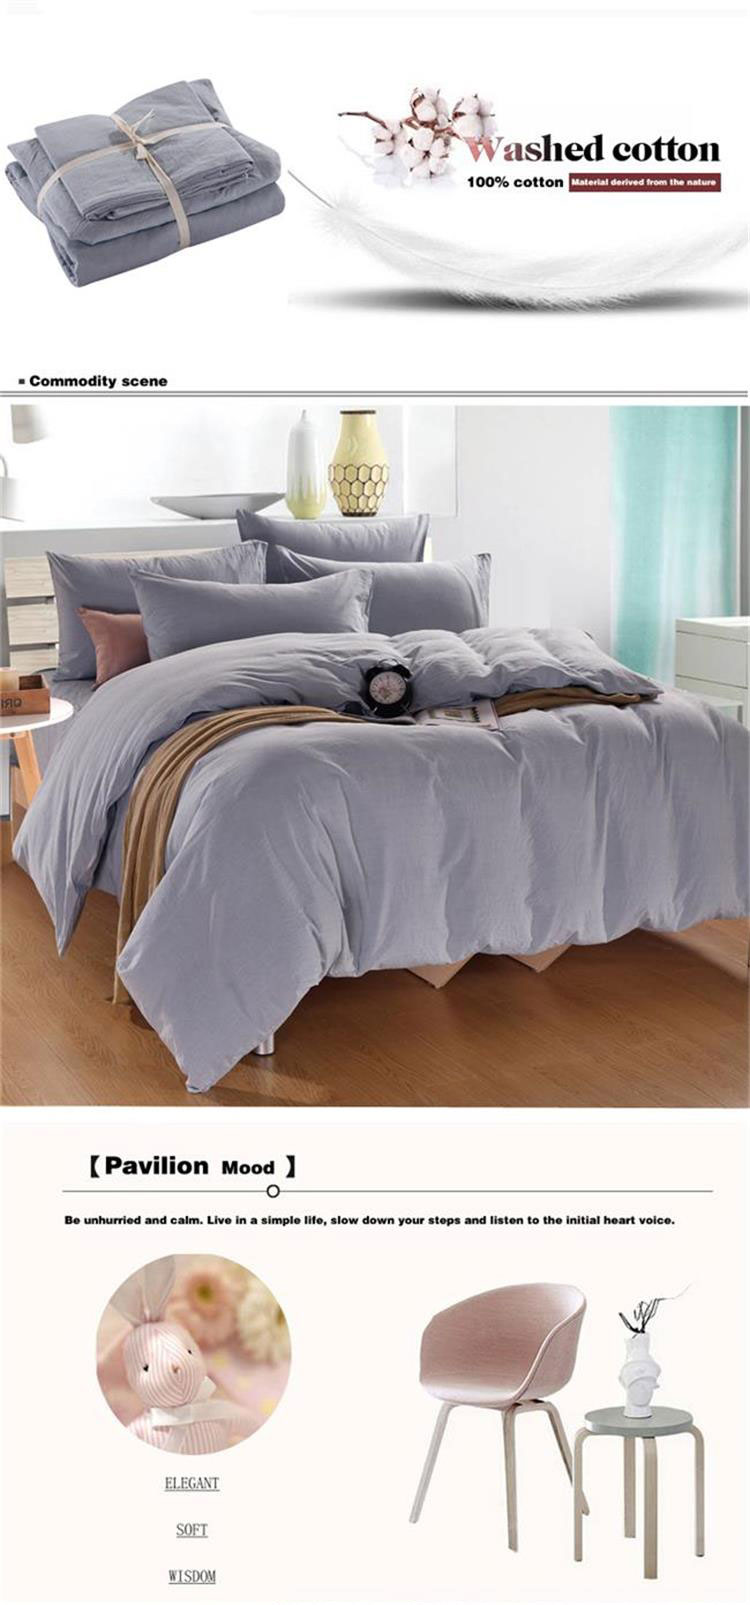 Discount Gray Comforter Sets King